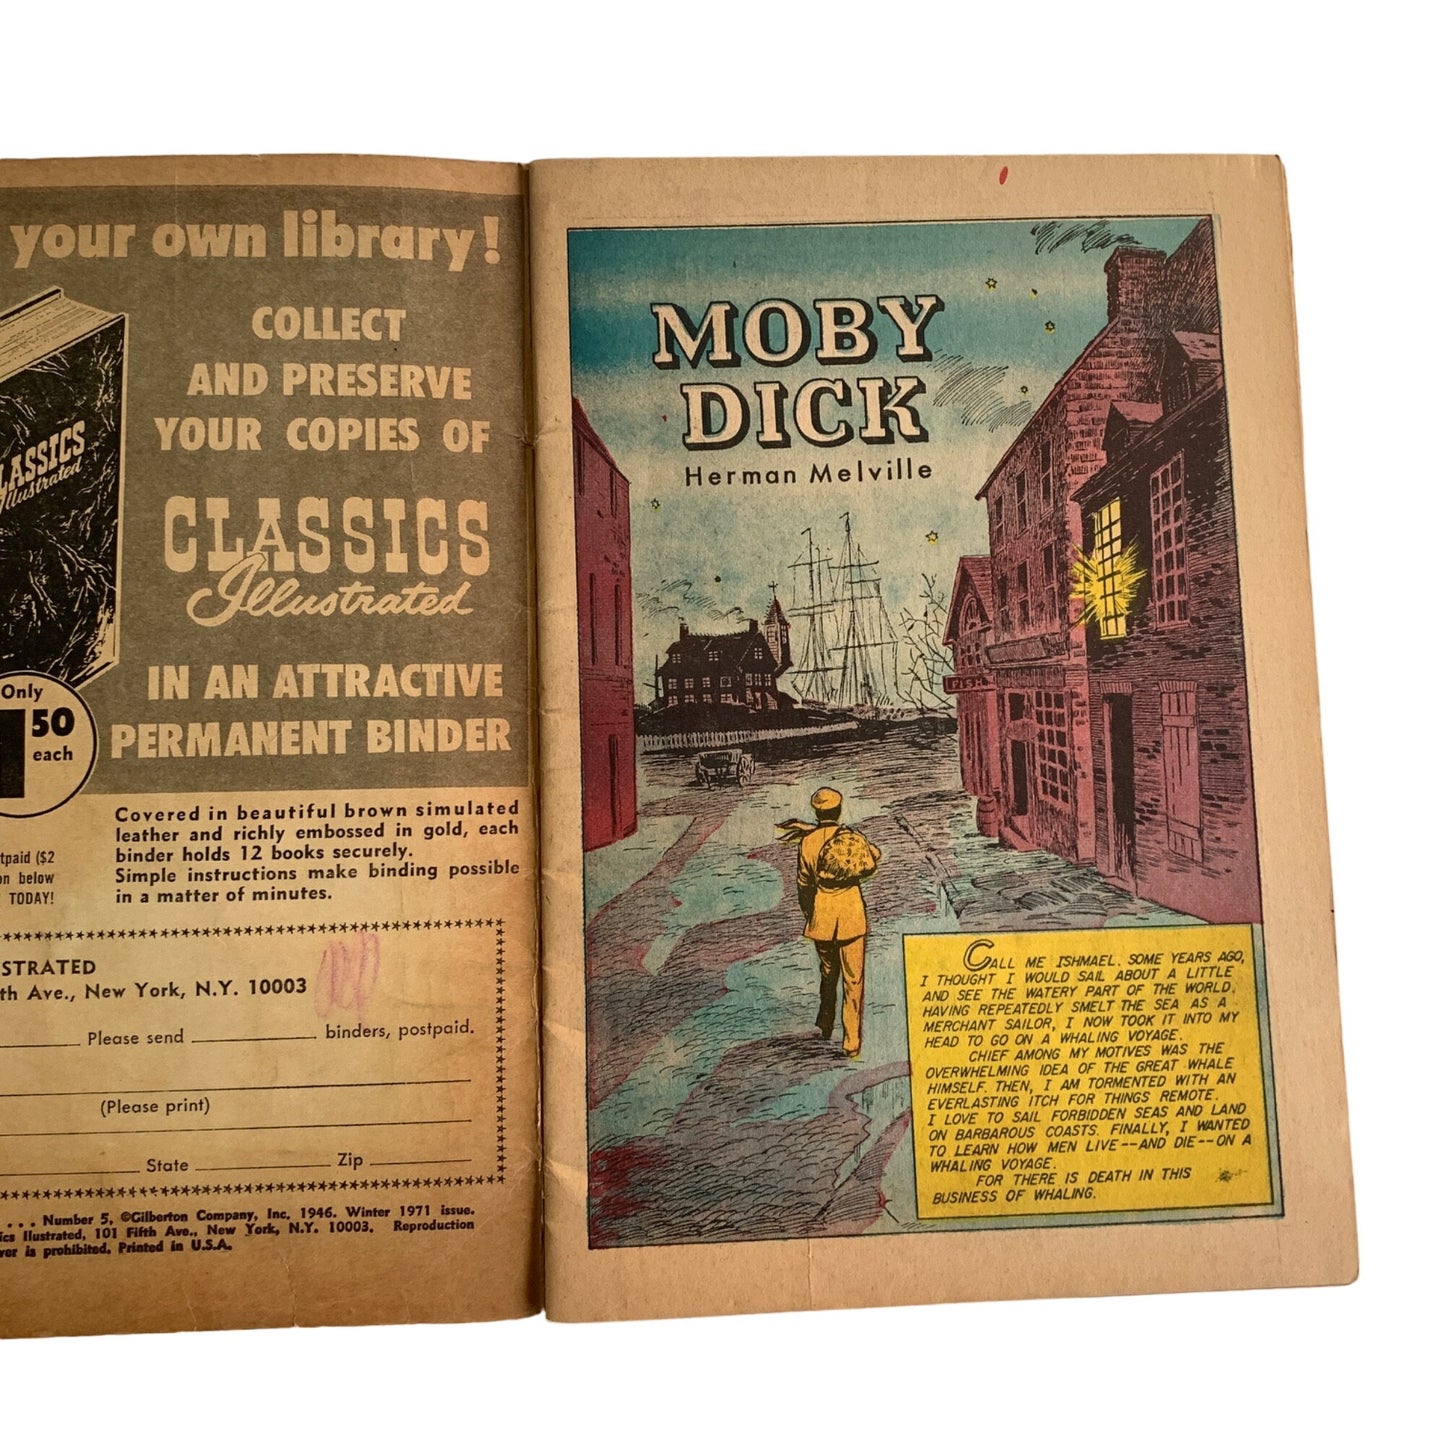 Classics Illustrated Moby Dick Comic Book No. 5